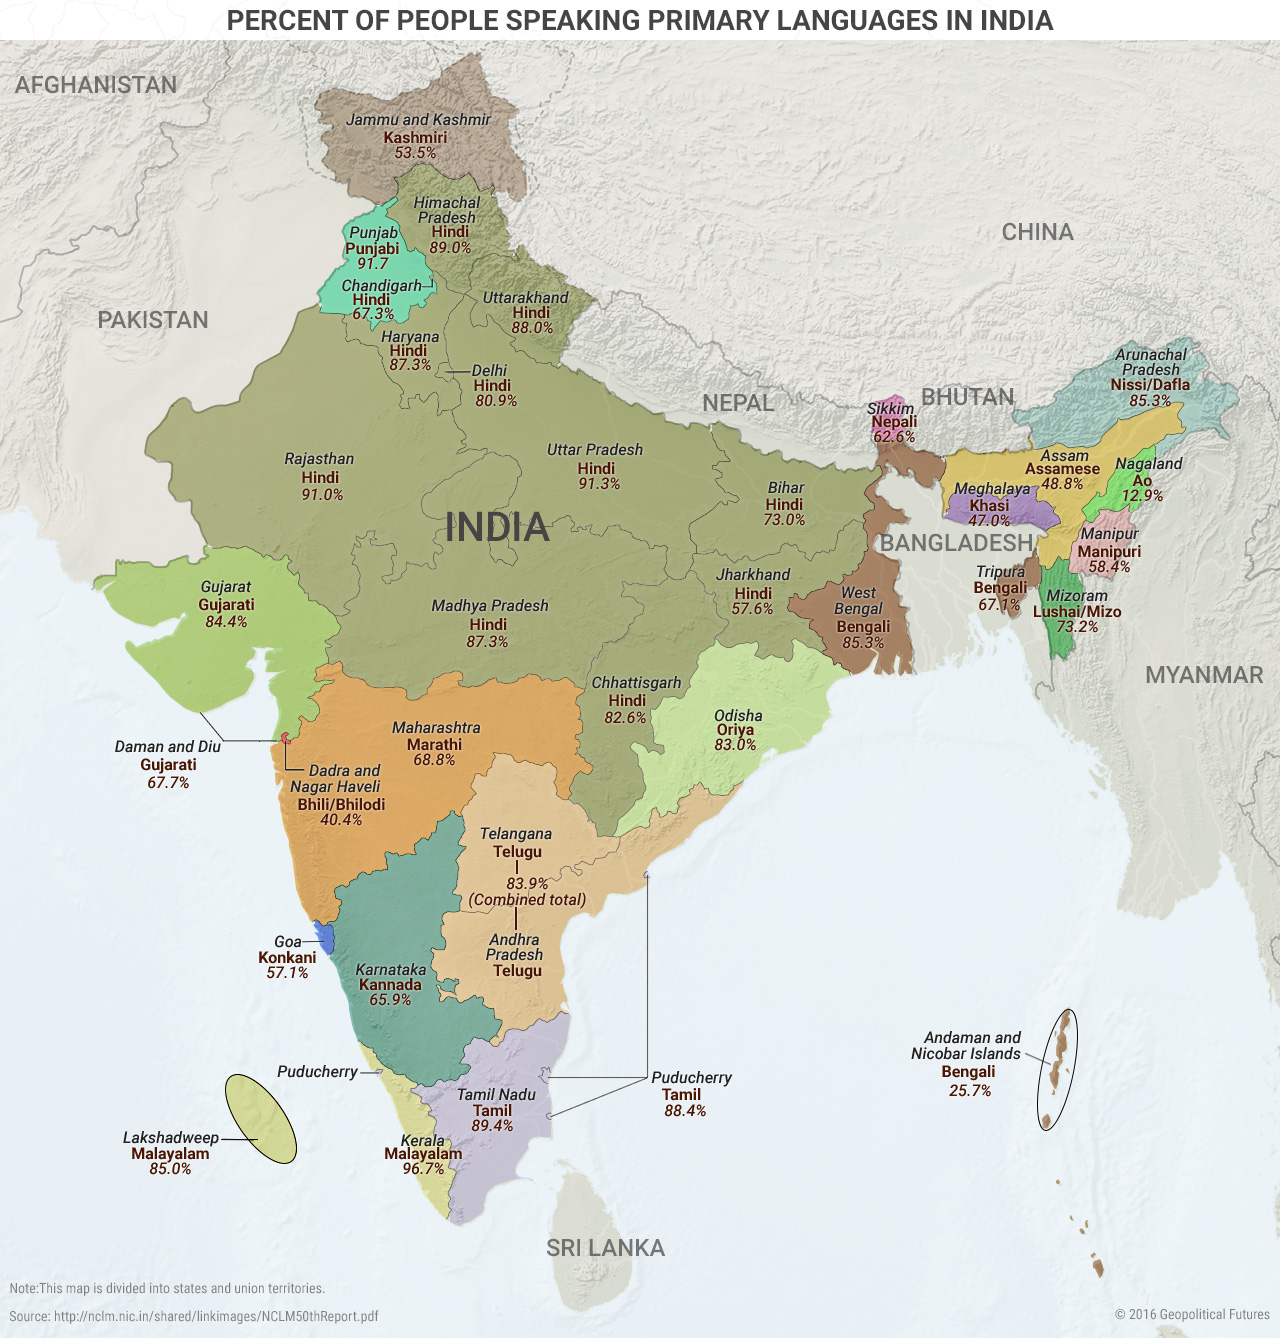 Percent of People Speaking Primary Languages in India - Geopolitical